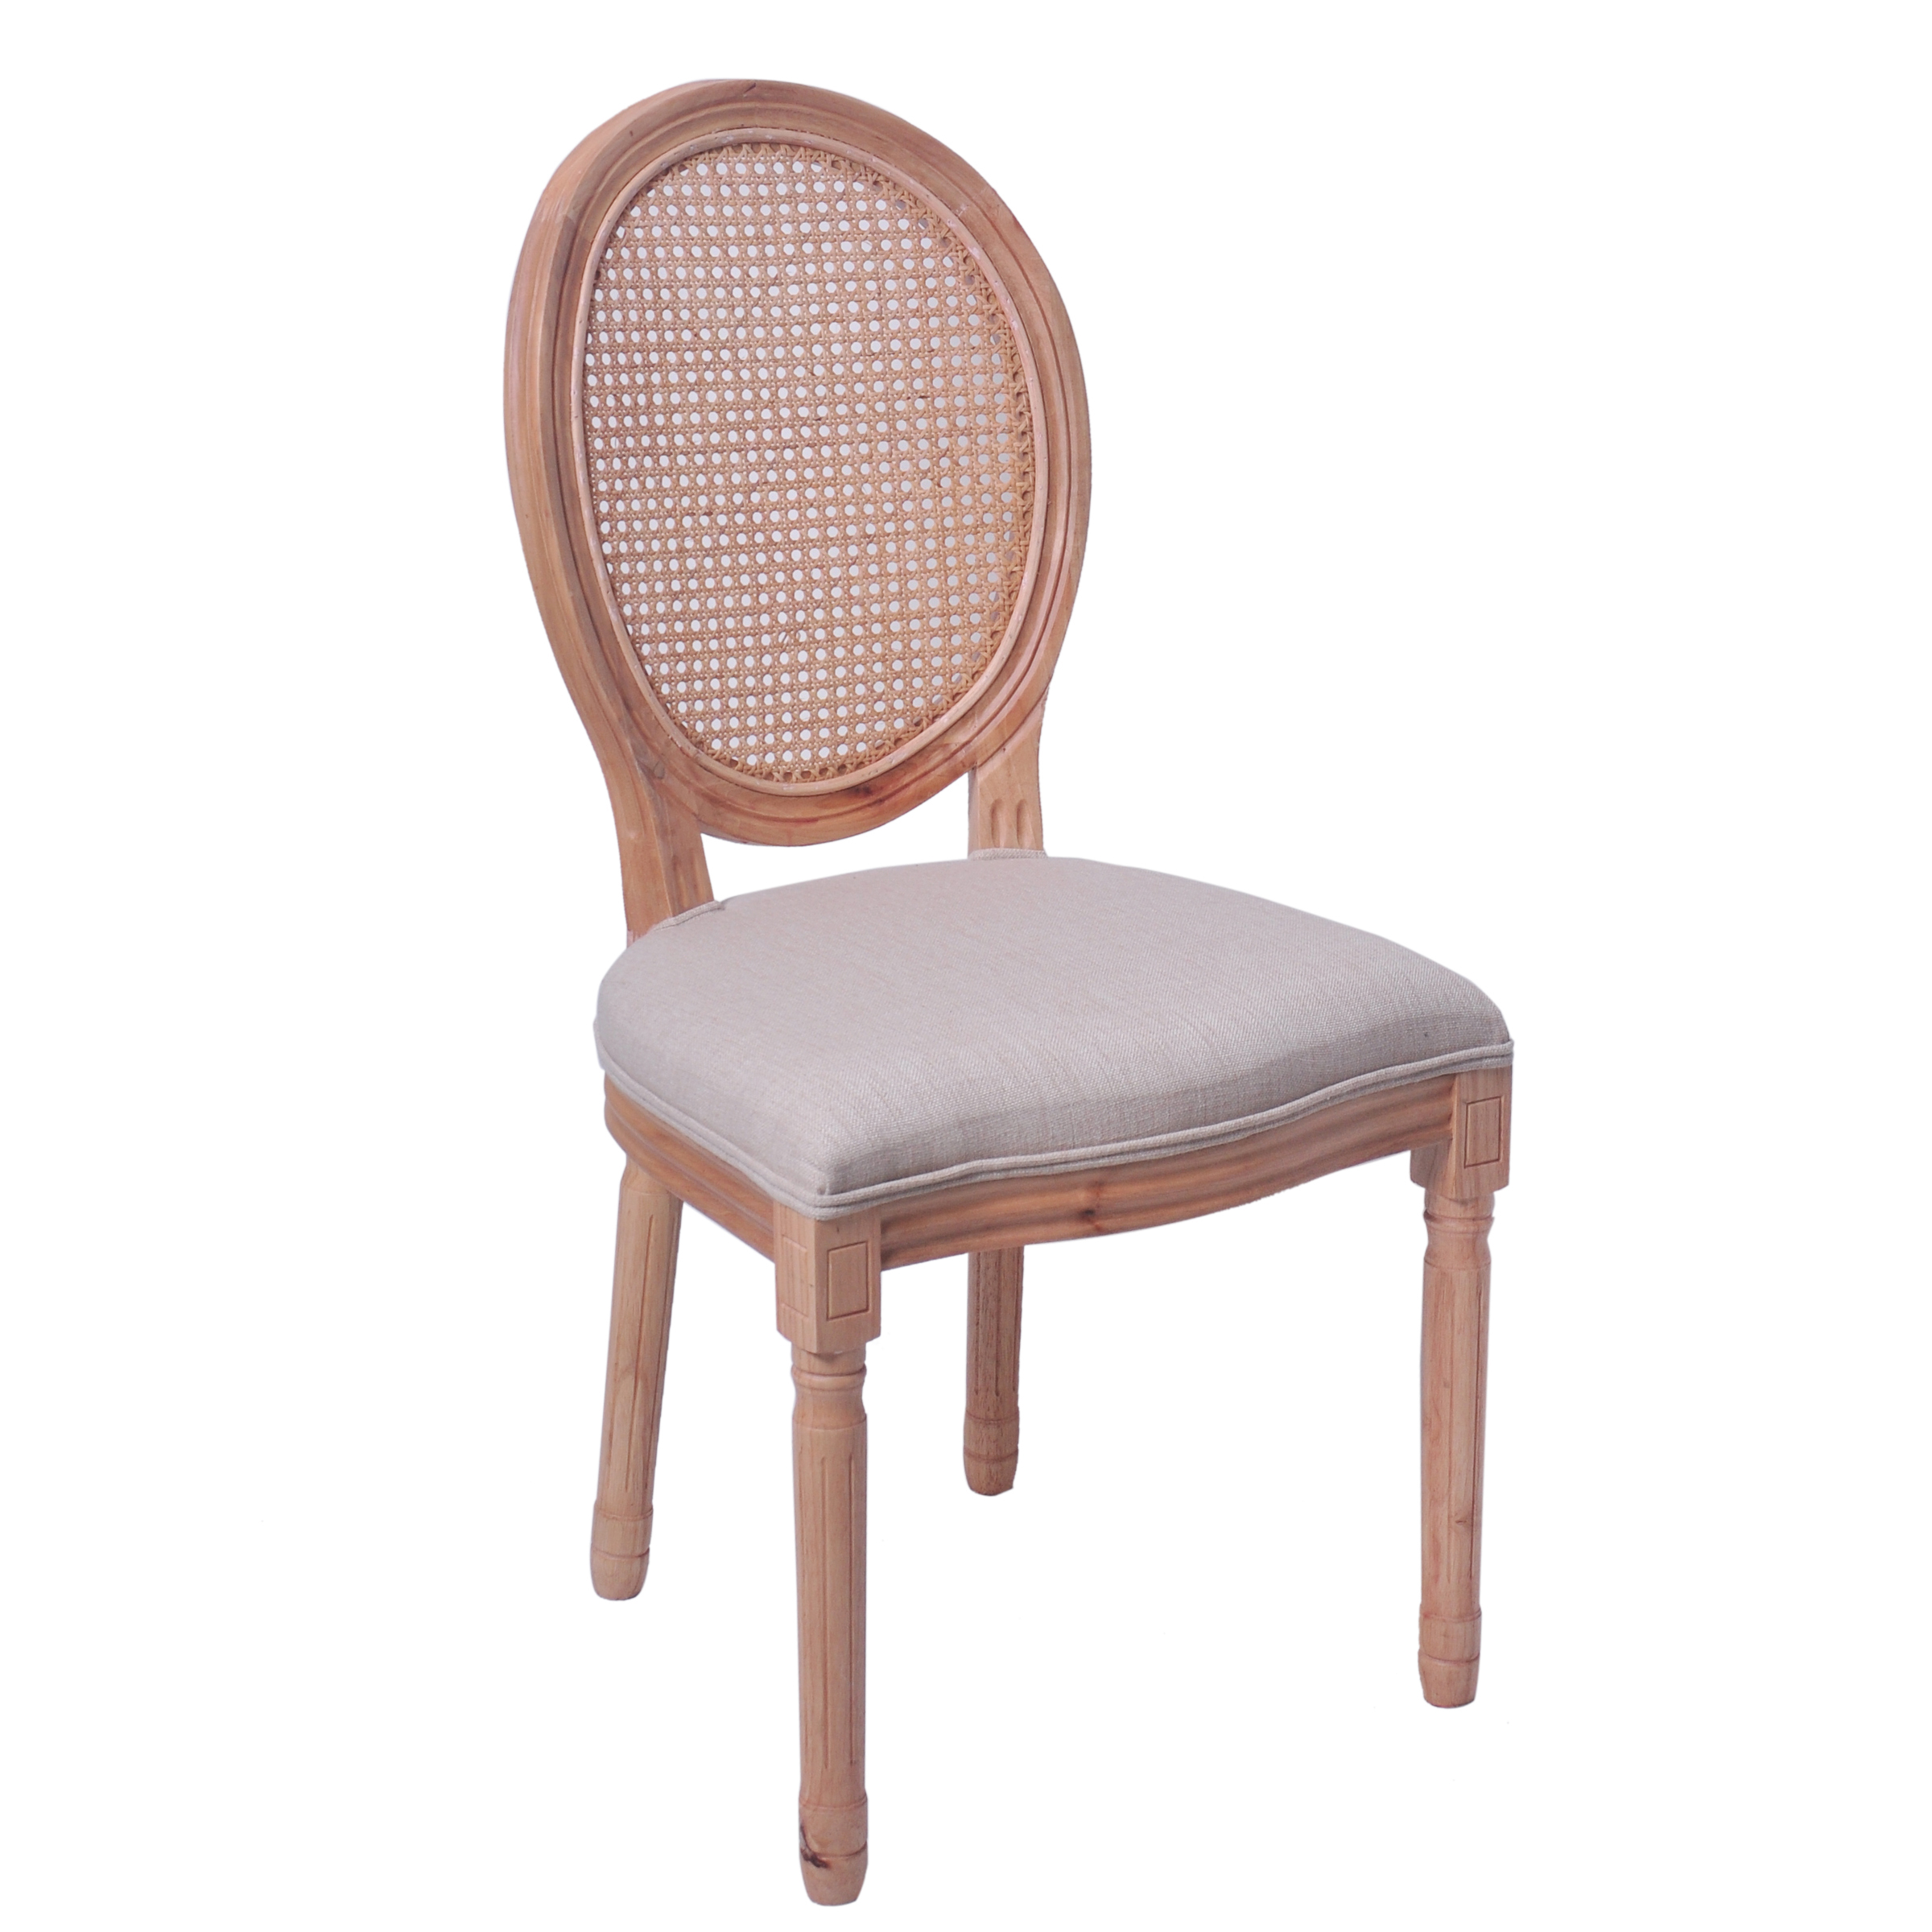 Louis Style Chair With Fabric Seat And Rattan Back